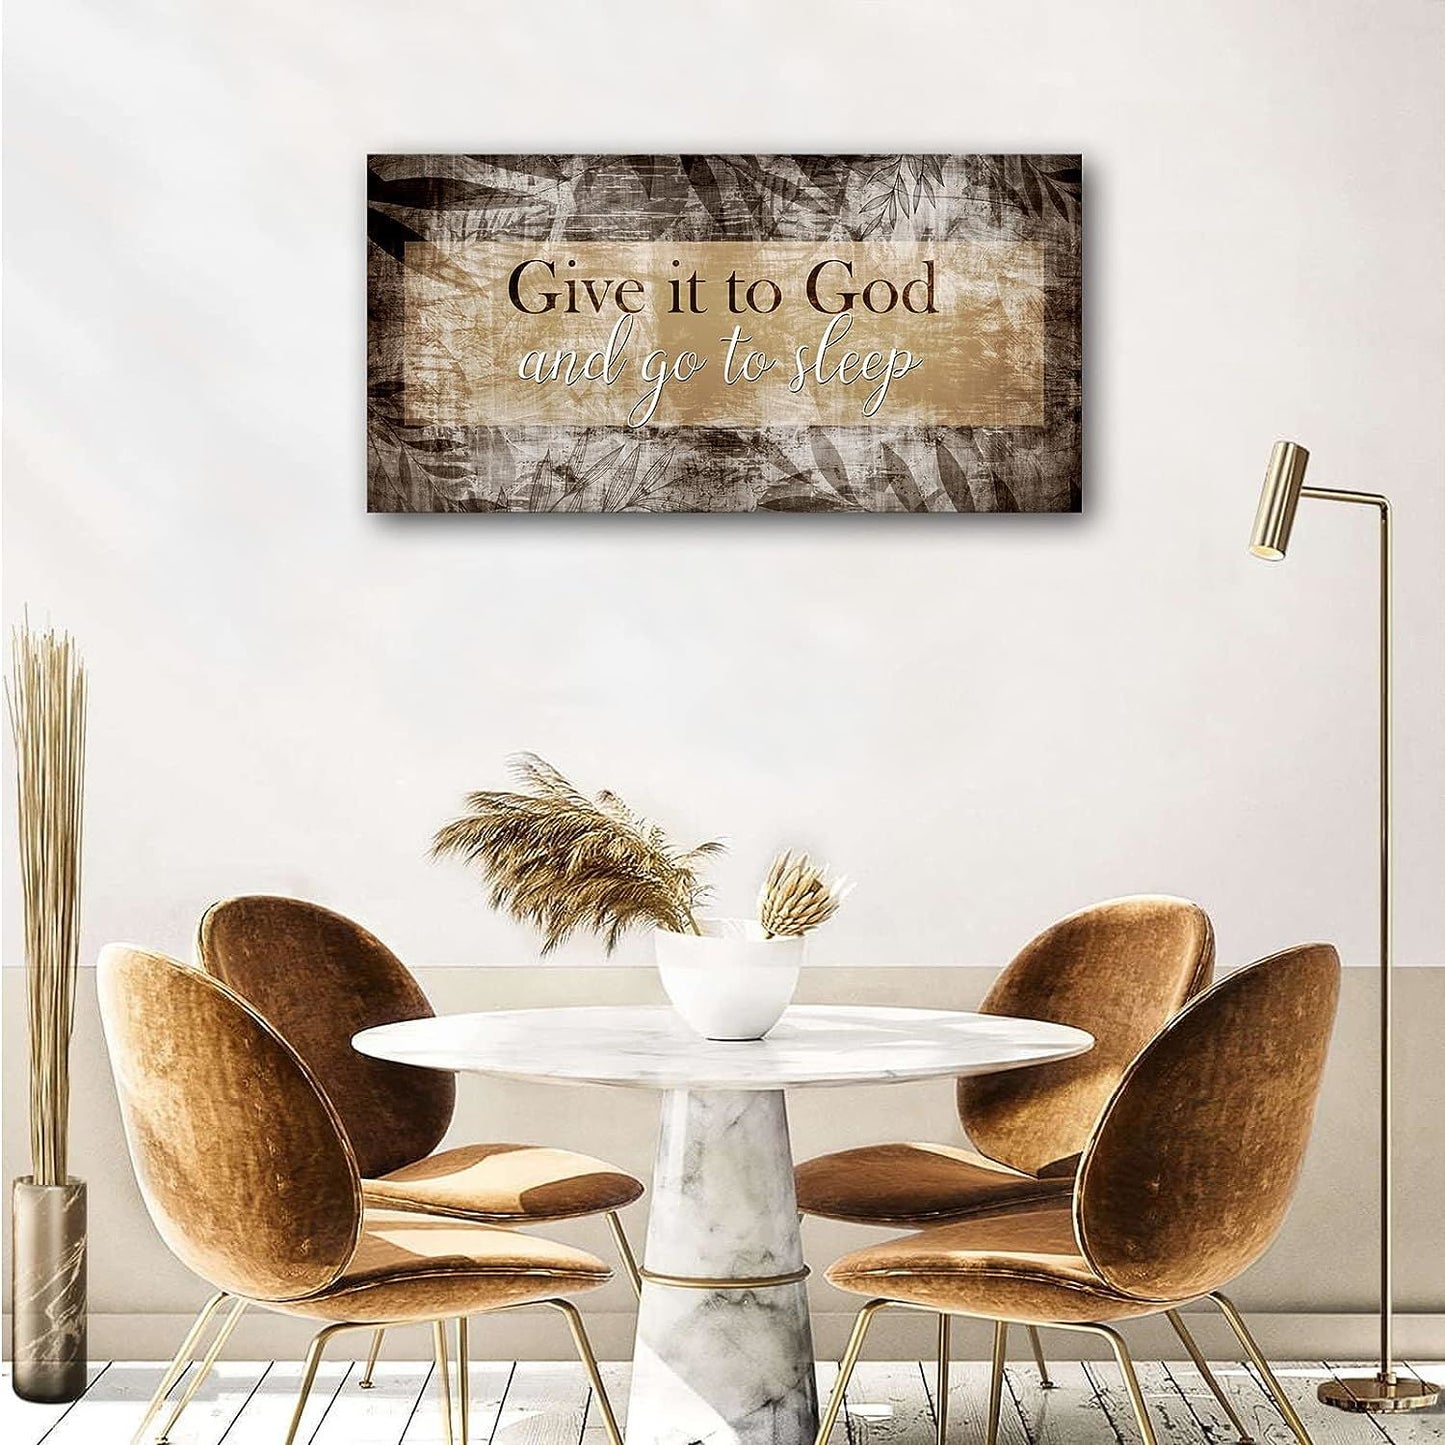 Canvas Wall Art for Bedroom - Christian Quote Sayings Wall Decor - Give it to God and go to Sleep Sign Canvas Prints Picture Stretched Framed Artwork for Living Room Home Decor; Easy to Hang